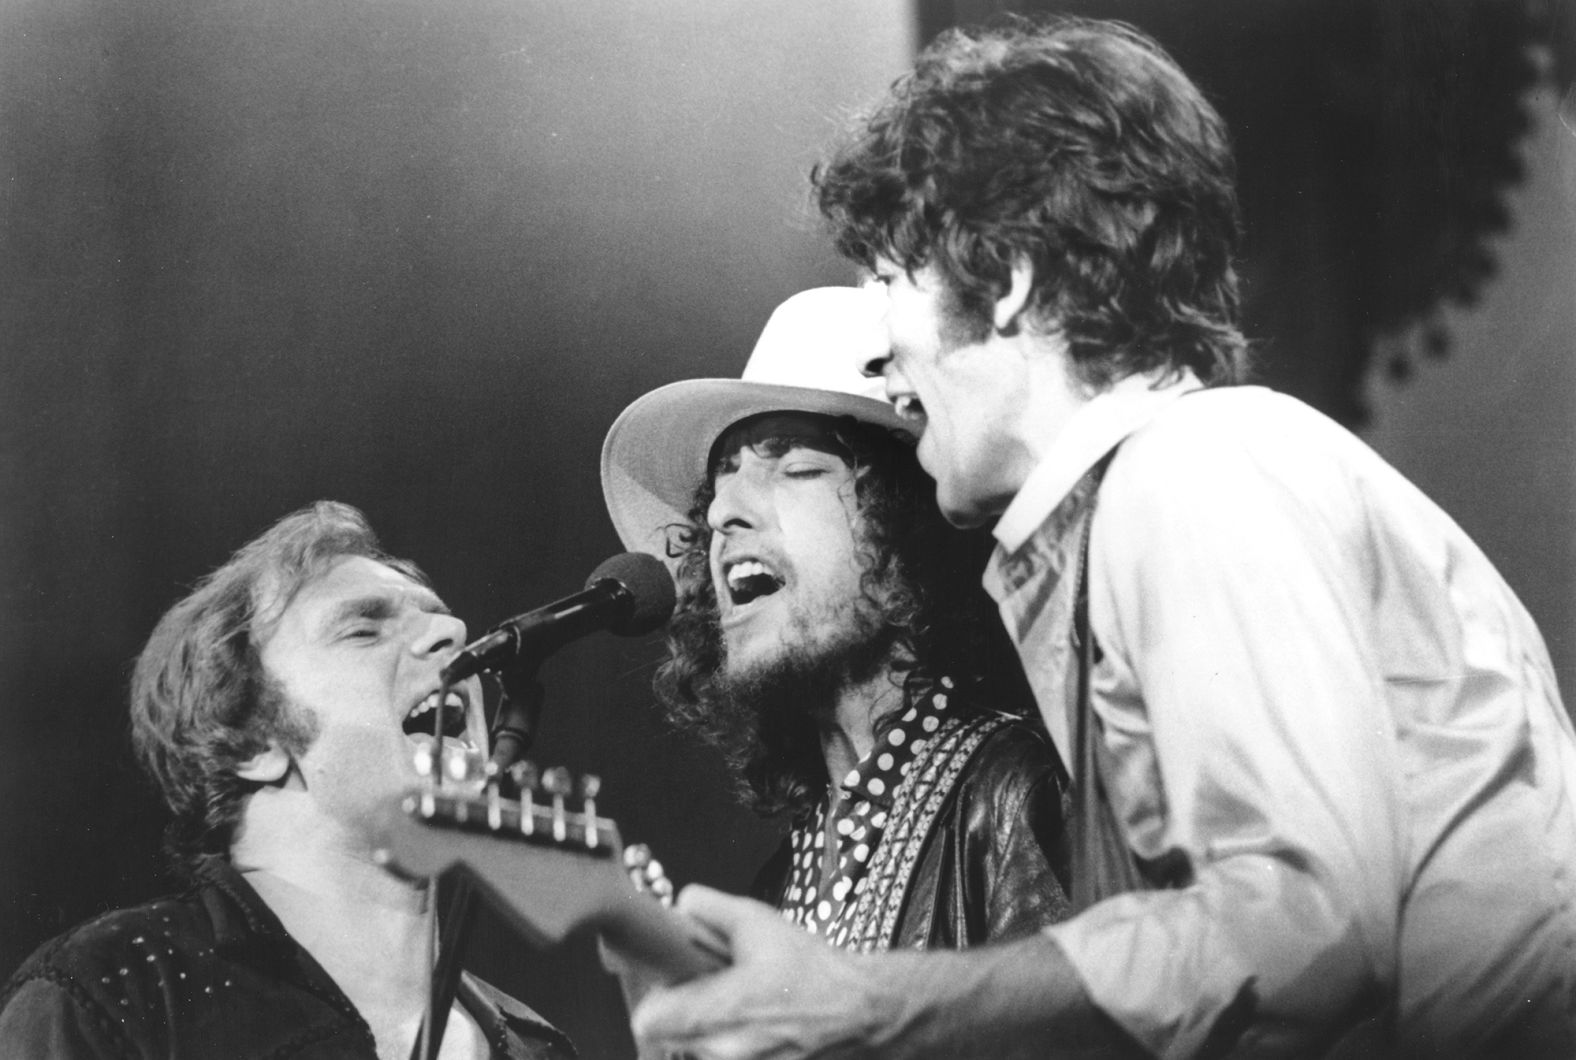 Dylan, center, performs with Van Morrison, left, and Robbie Robertson of The Band at a concert in San Francisco in 1976.